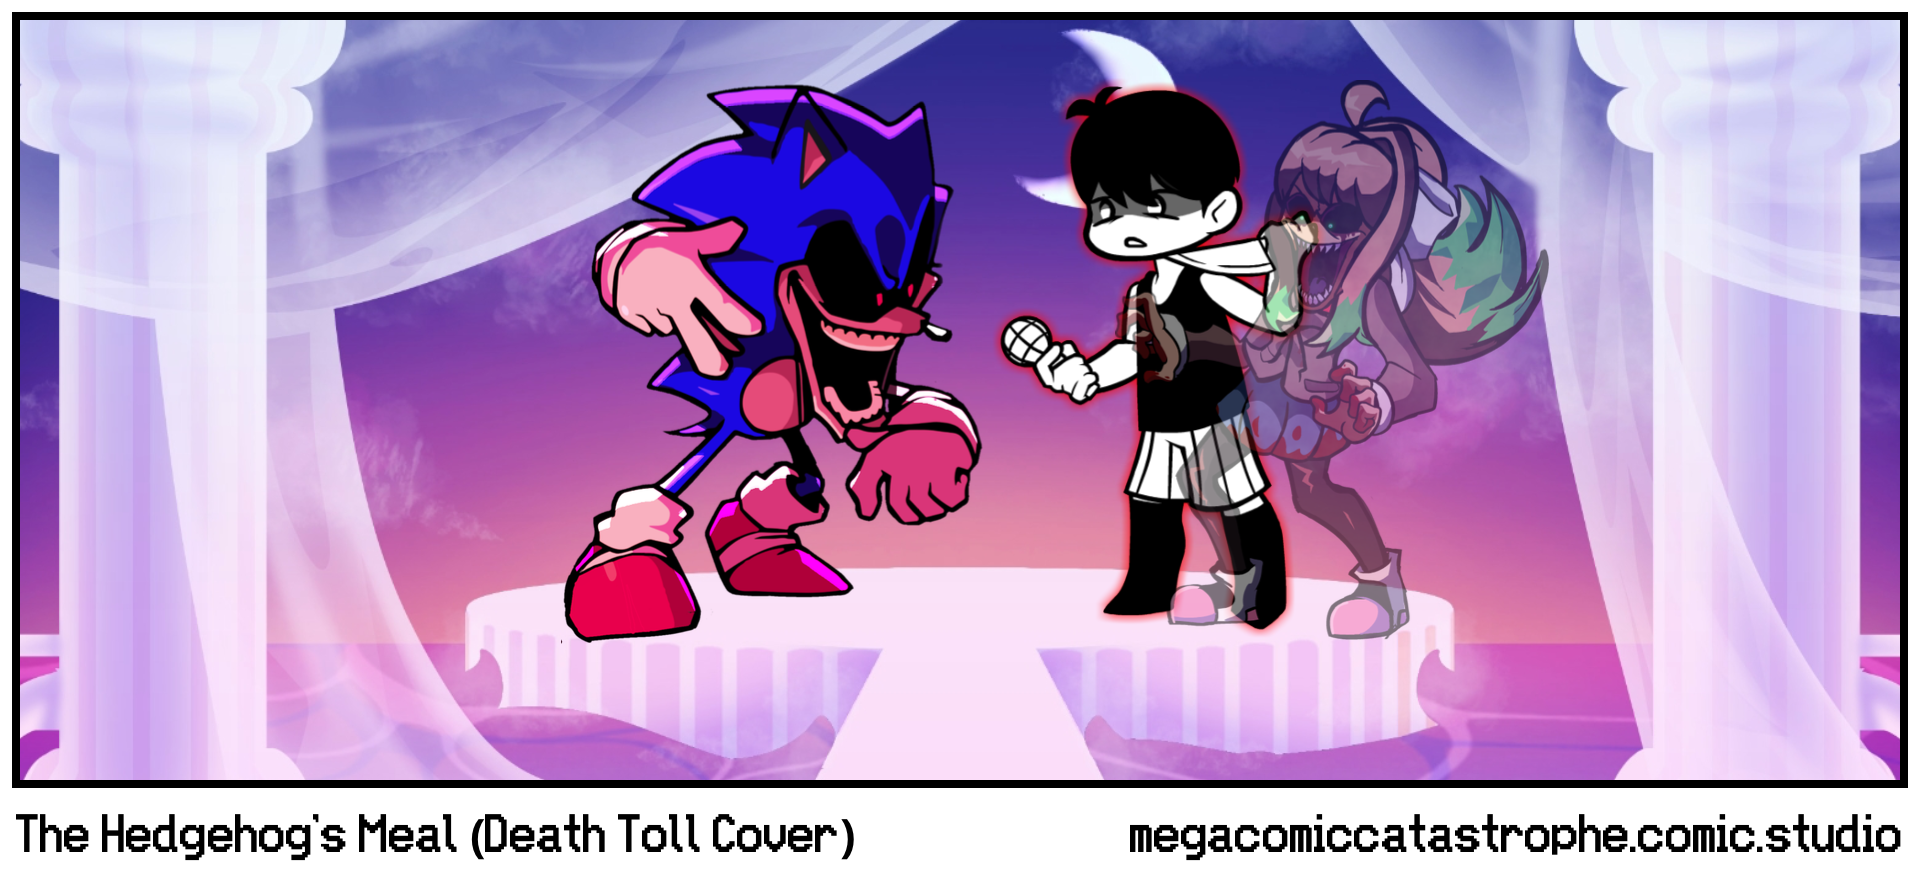 The Hedgehog’s Meal (Death Toll Cover)